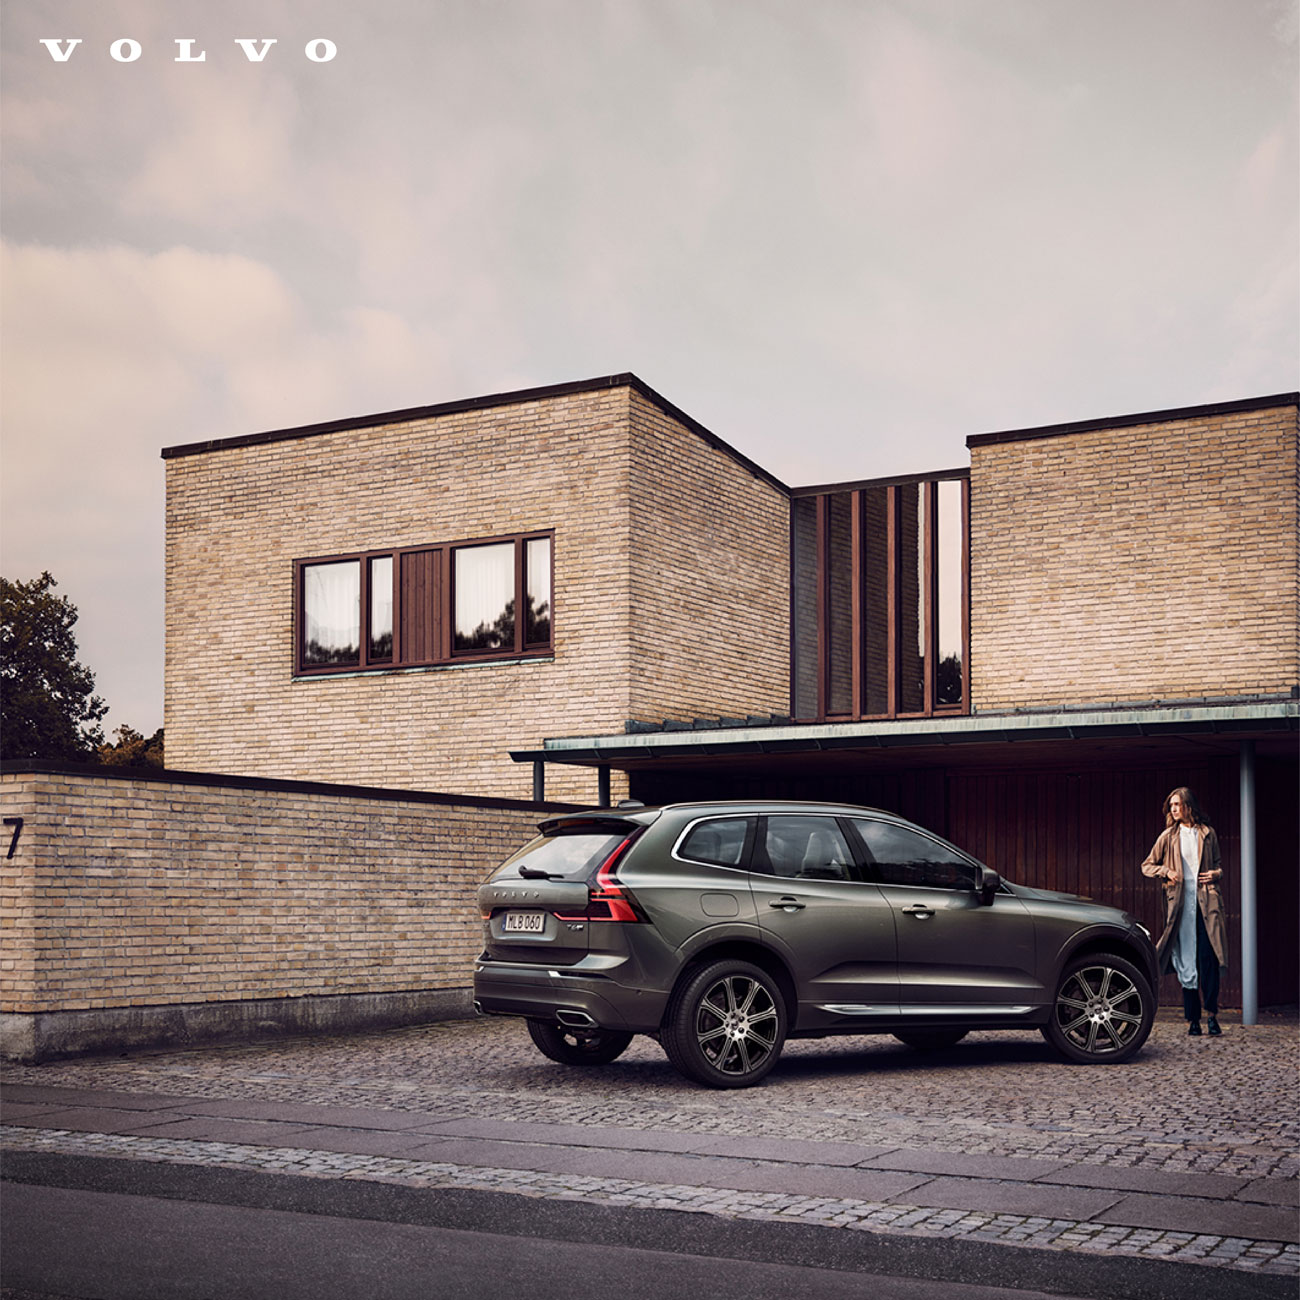 volvo-with-logo-03